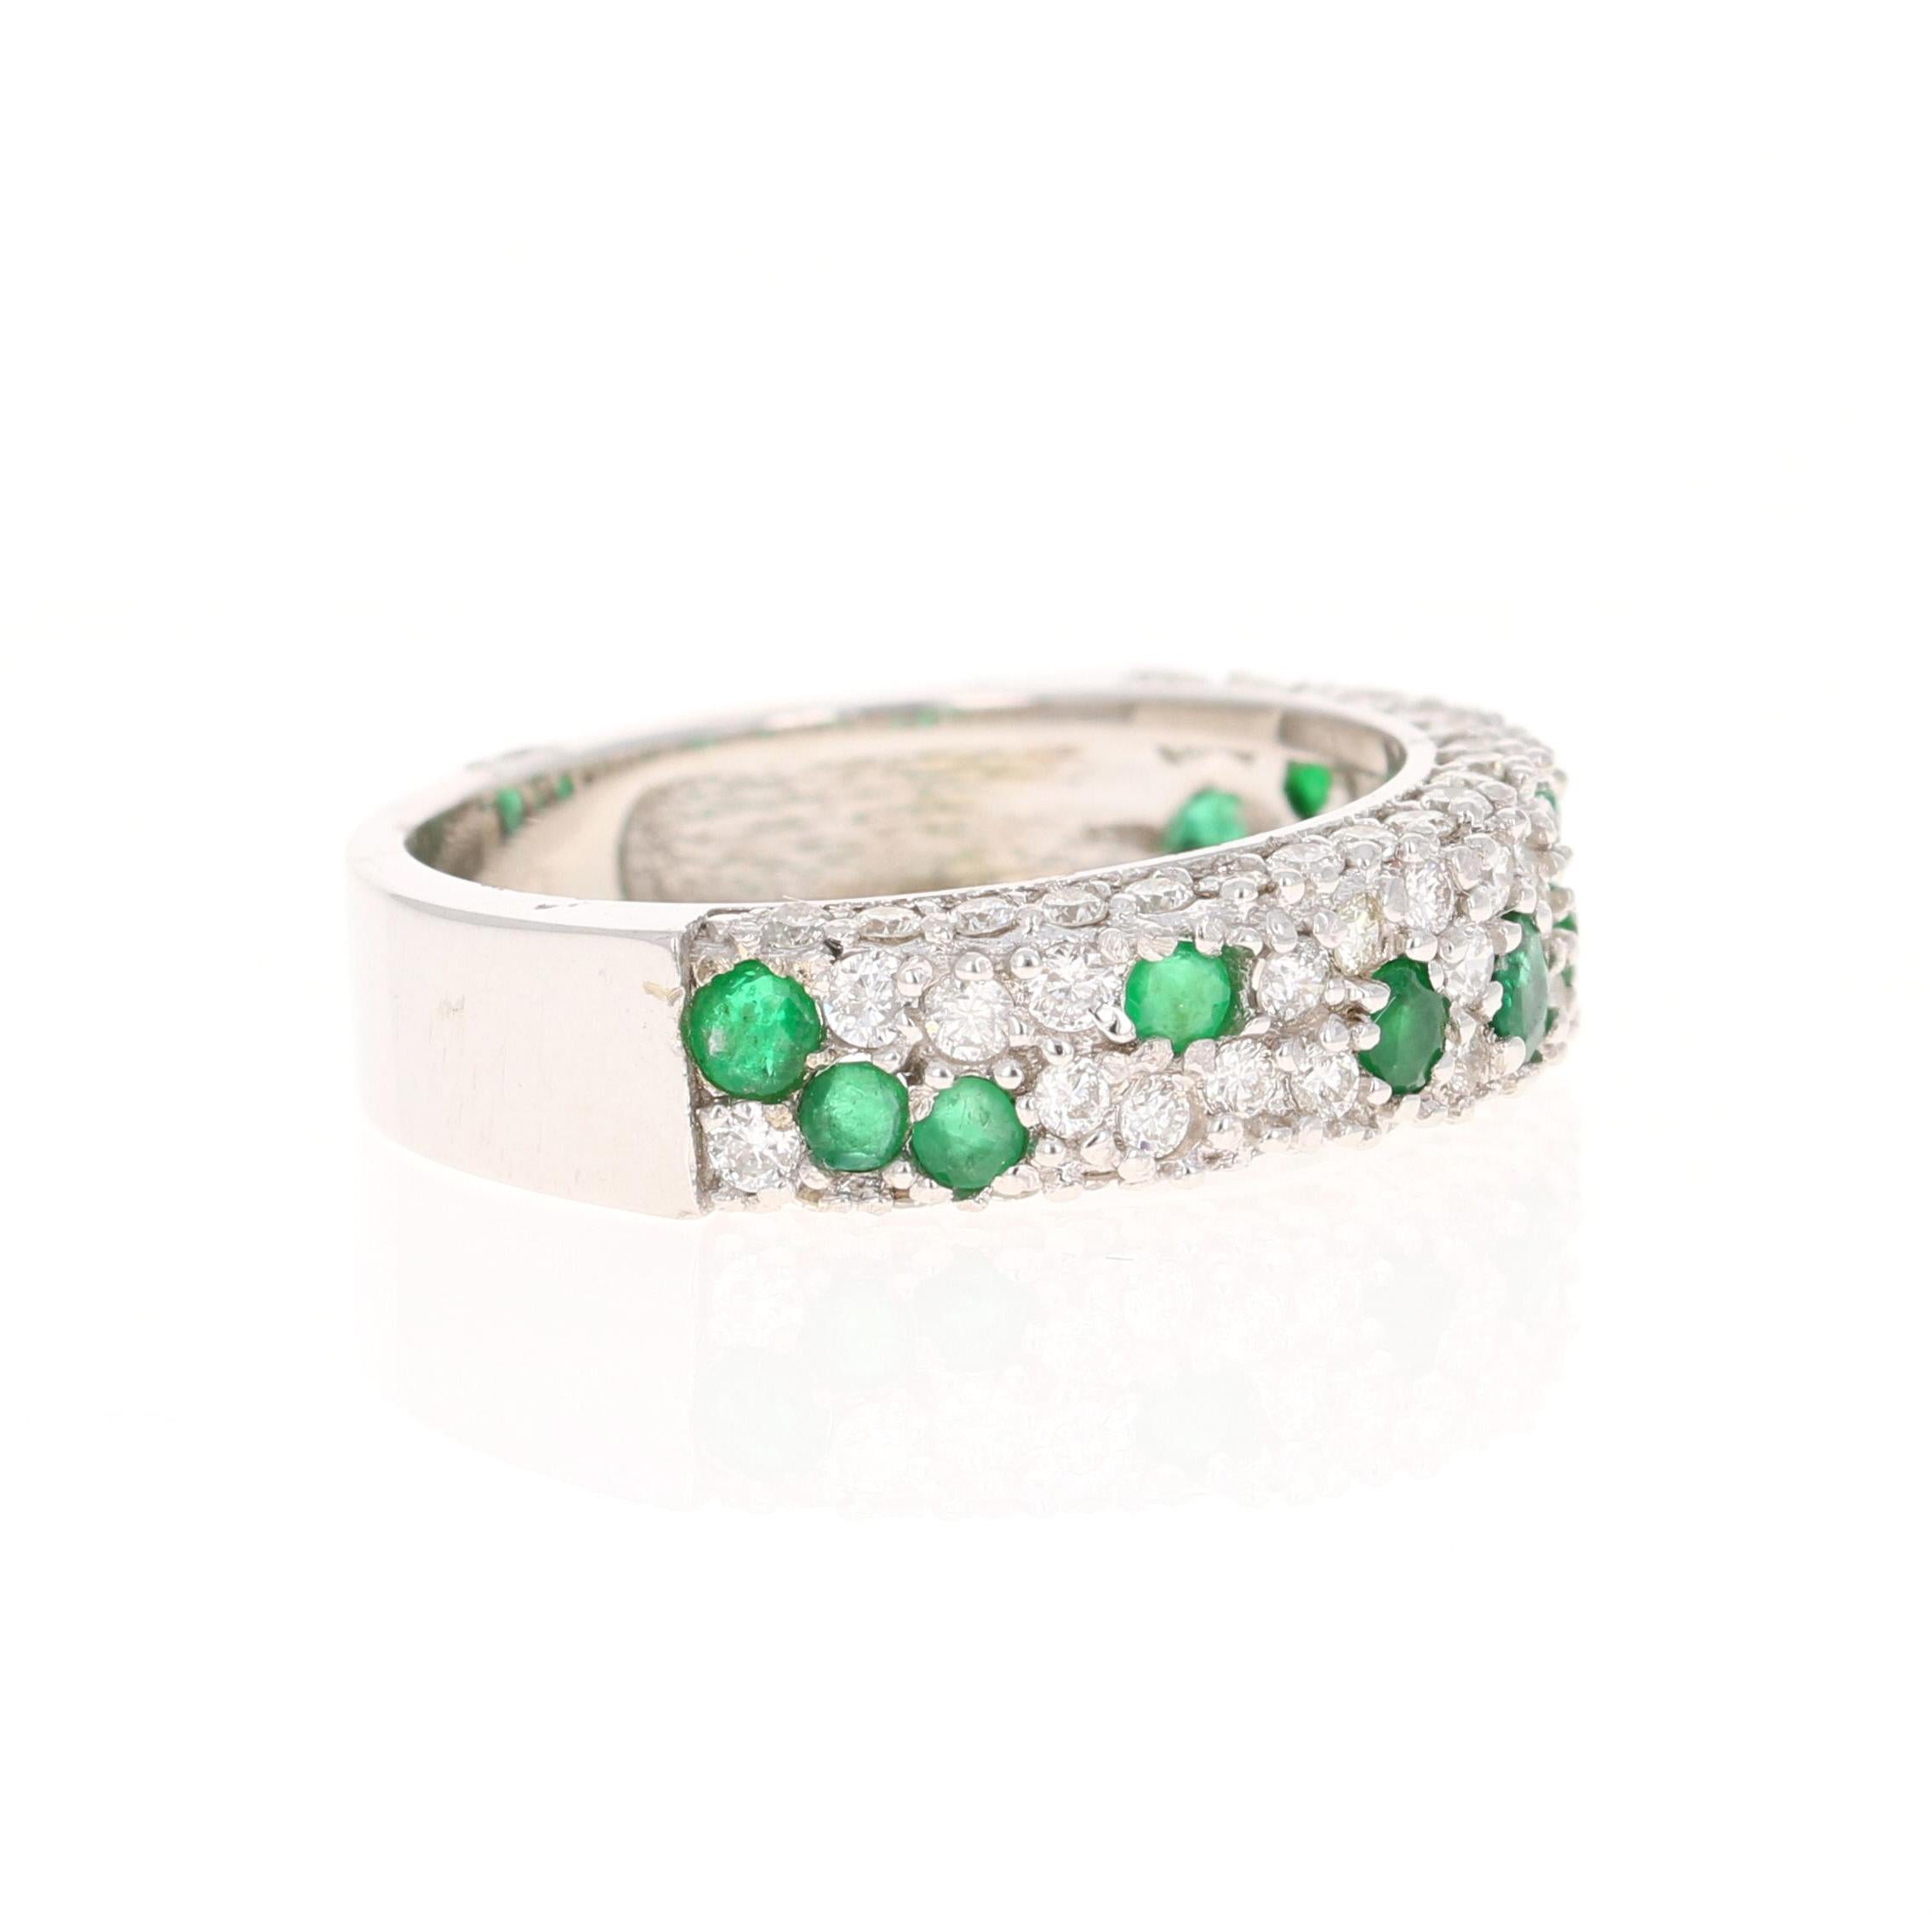 This gorgeous band has 13 Round Cut Emeralds that weigh 0.60 carats and 61 Round Cut Diamonds that weigh 0.77 carats. (Clarity: VS Color: H) The total carat weight of the ring is 1.37 carats. 

The ring is designed in 18 Karat White Gold and weighs